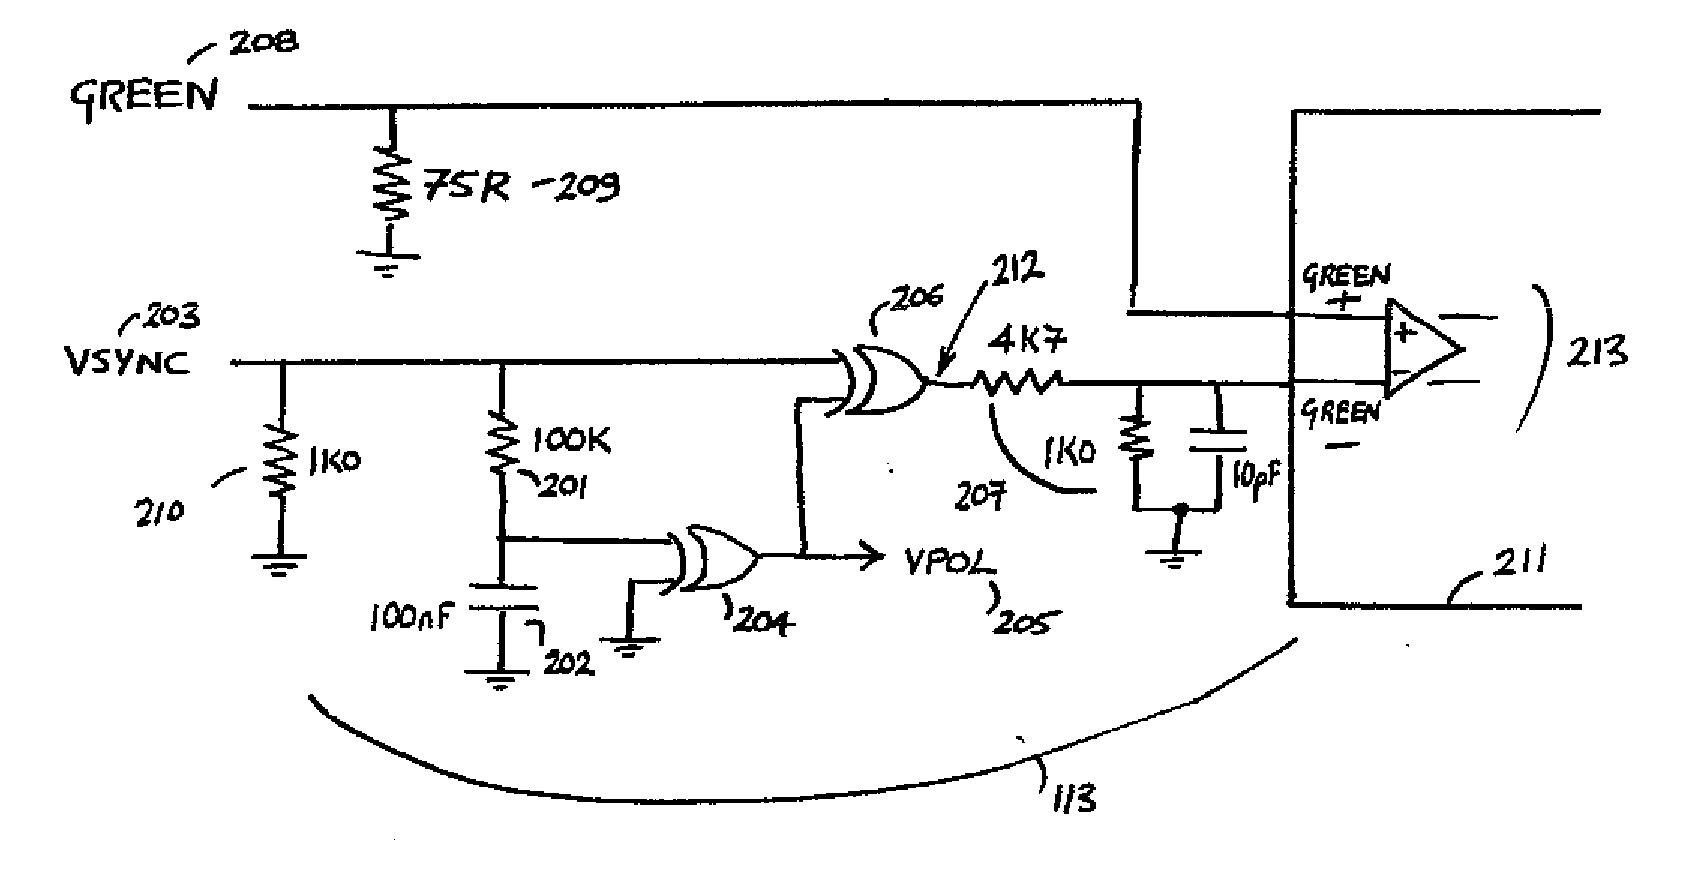 Method and apparatus for audio and video signal transmission